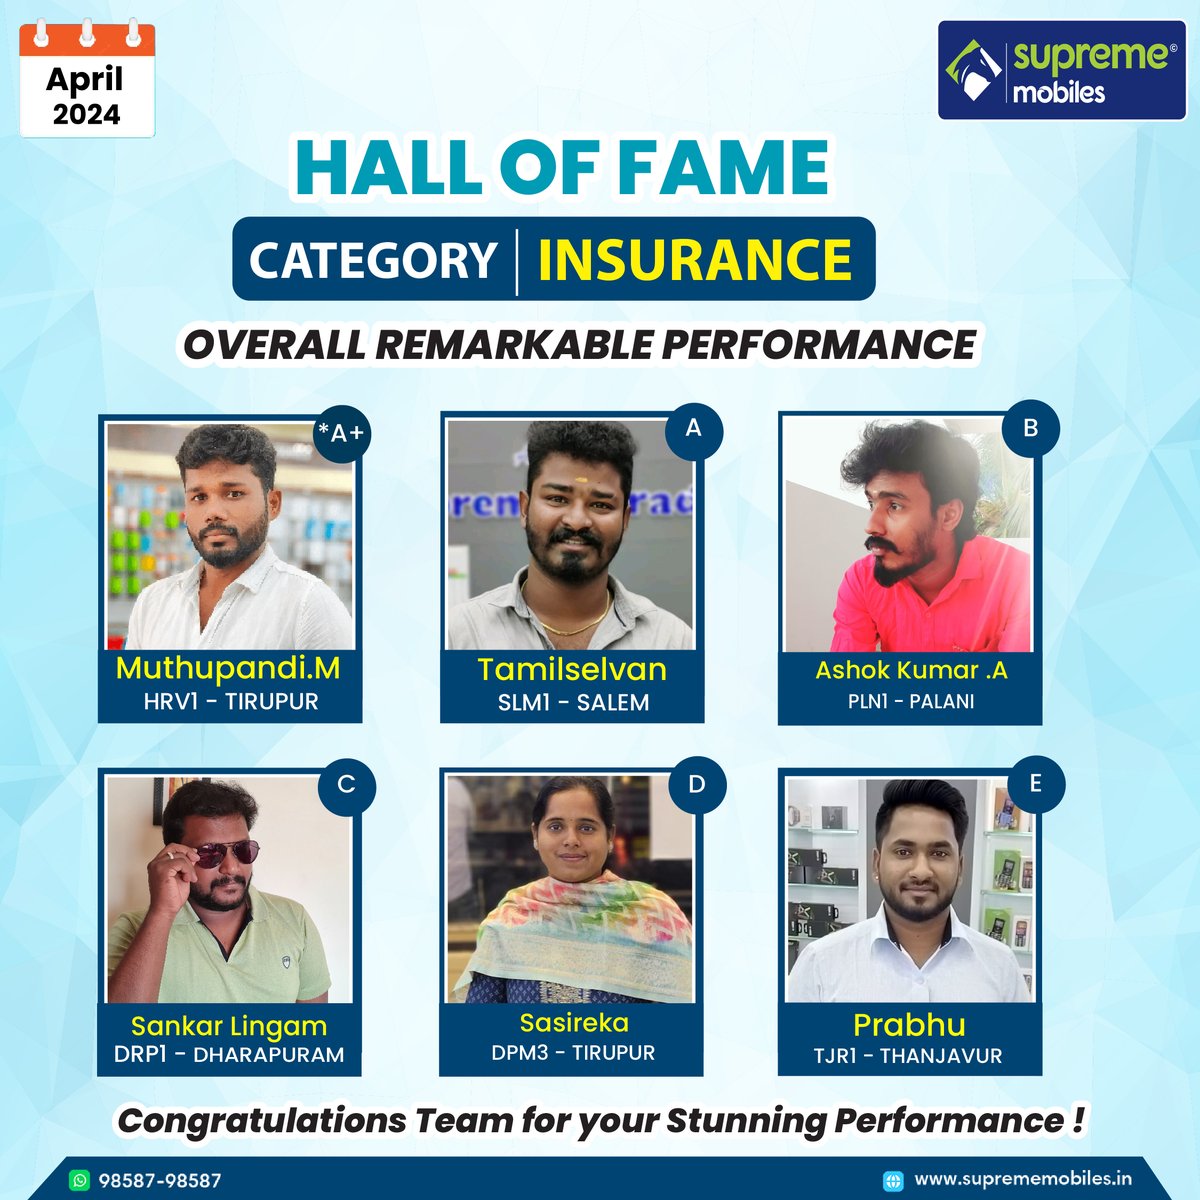 Hall of Fame

Overall remarkable Performance

Congratulation Team for your Stunning Performance!

#Suprememobiles #sucessmindset #sucesschallenge #targetstyle #target #targeting #targetfinds #targetchallenge #congratulation #Congratulations #team #teamwork